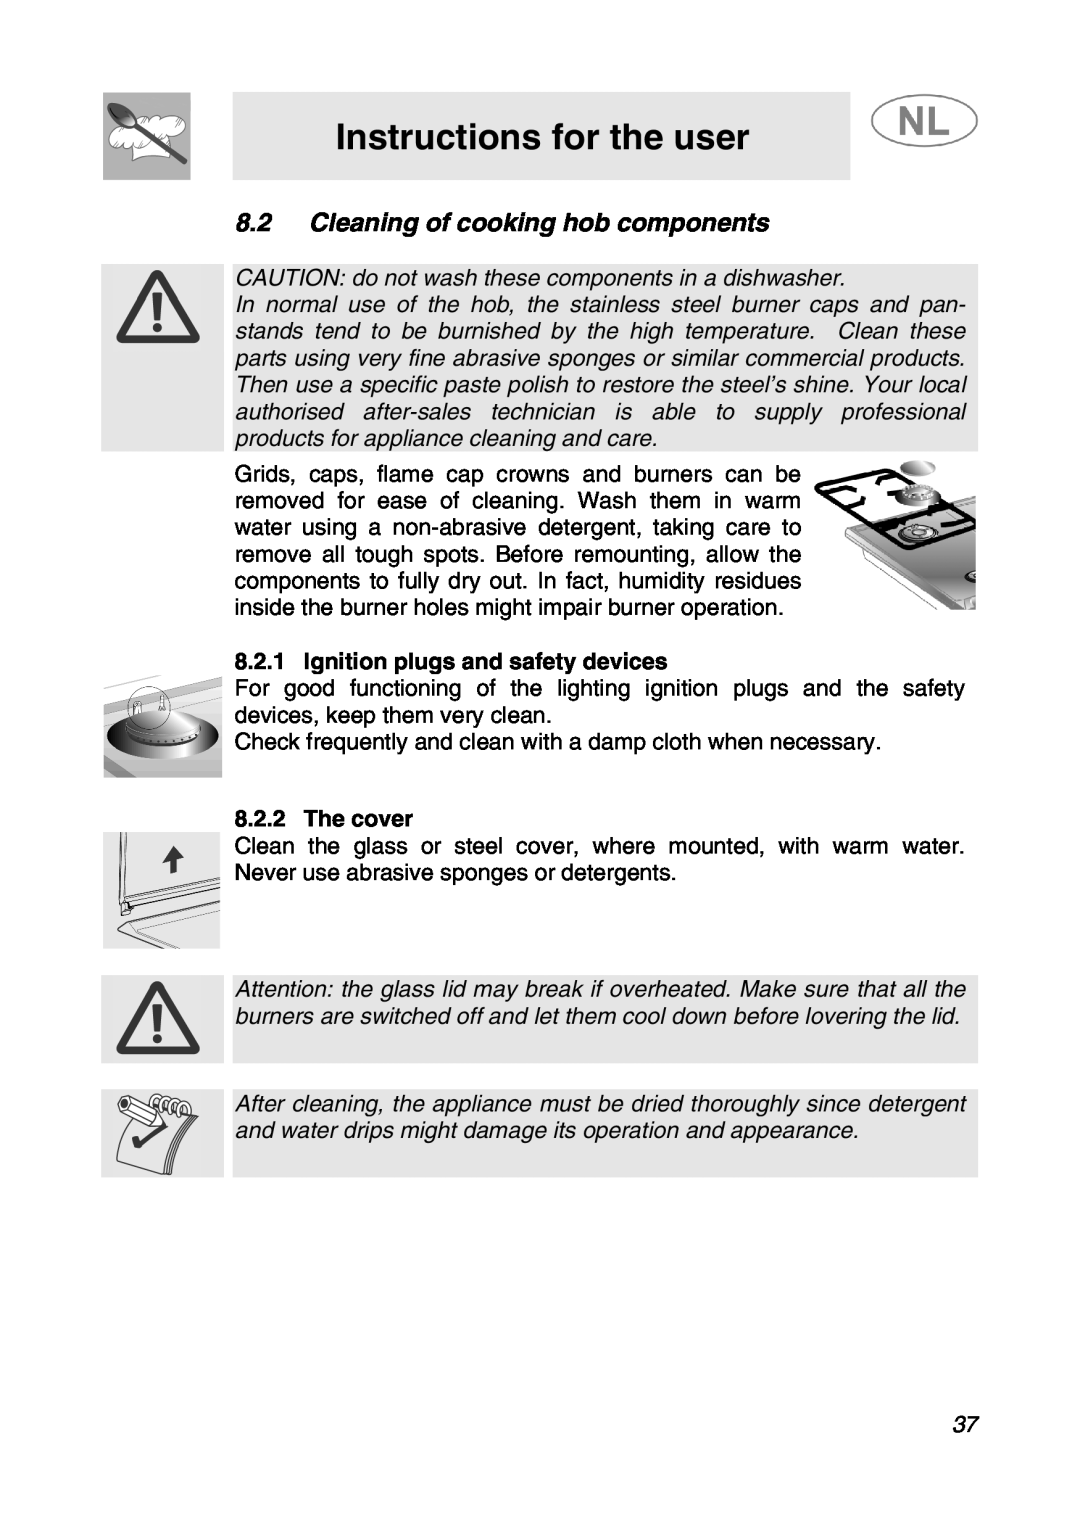 Smeg SNL574GH manual Cleaning of cooking hob components, CAUTION do not wash these components in a dishwasher, The cover 